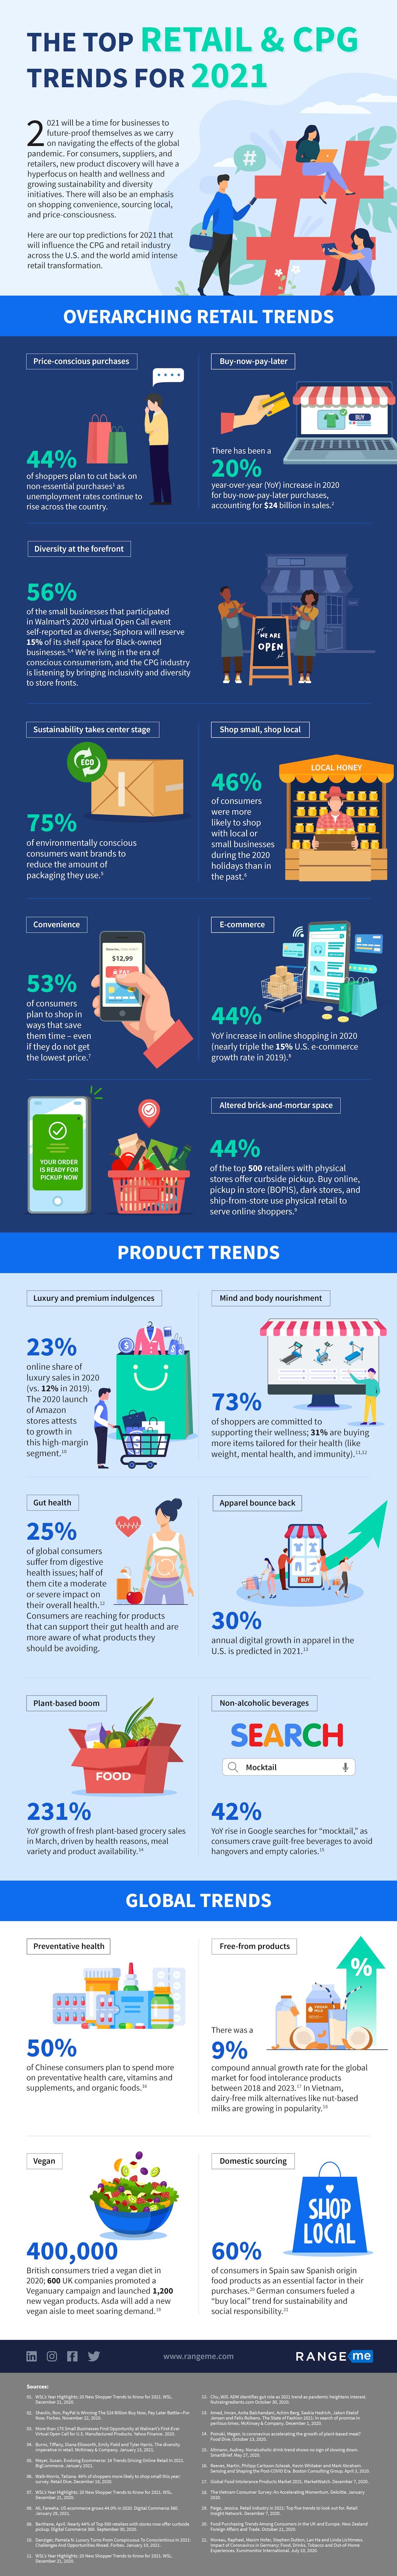 2021 CPG and Retail Trends